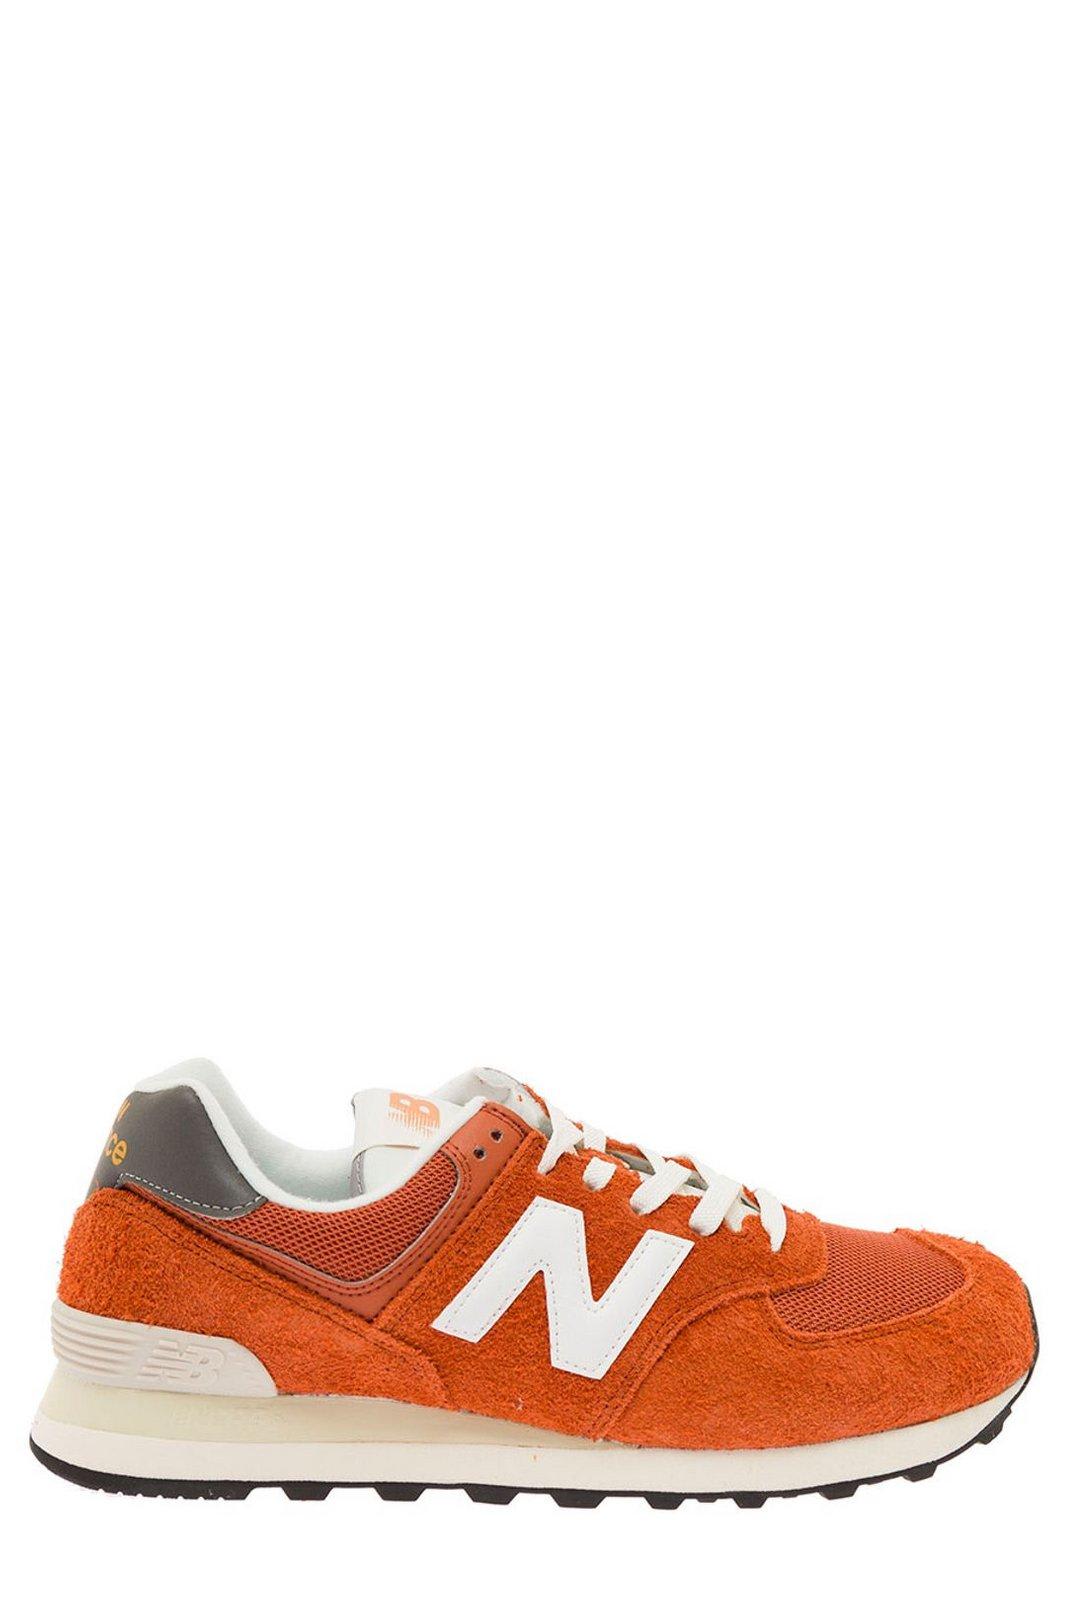 New Balance 574 Round Toe Lace-up Sneakers